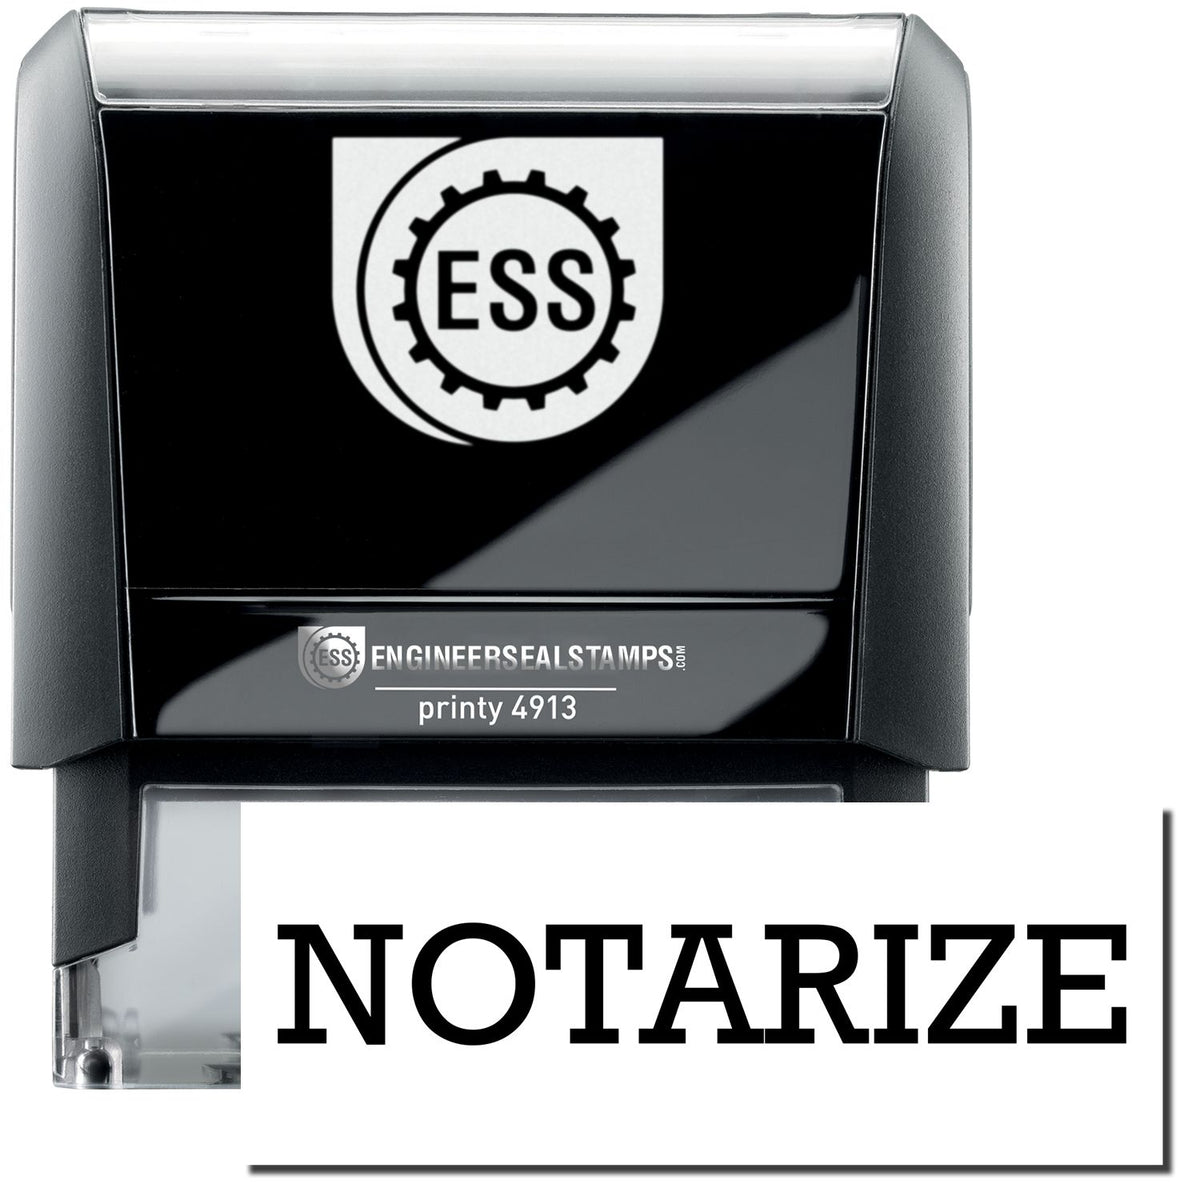 A self-inking stamp with a stamped image showing how the text &quot;NOTARIZE&quot; in a large bold font is displayed by it.